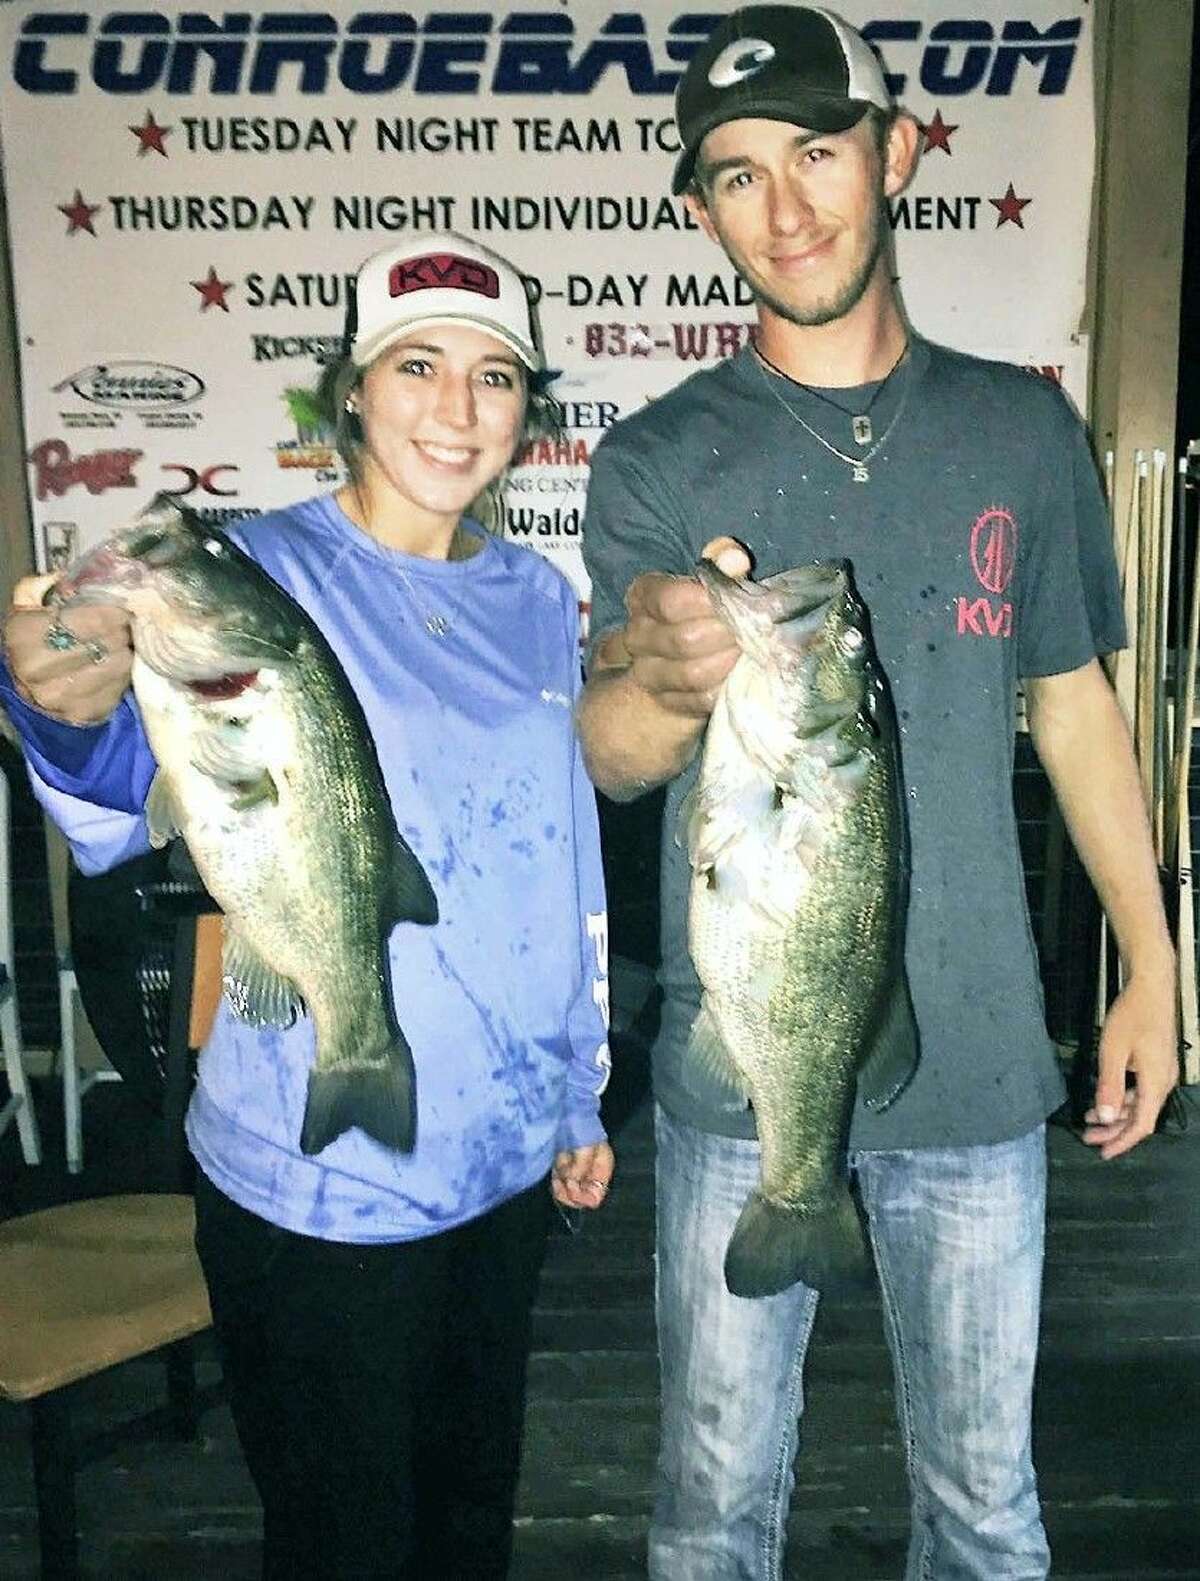 Wesley Baxley and Mackenzie Green came in second place in the CONROEBASS Tuesday tournament with a total stringer weight of 5.94 pounds.